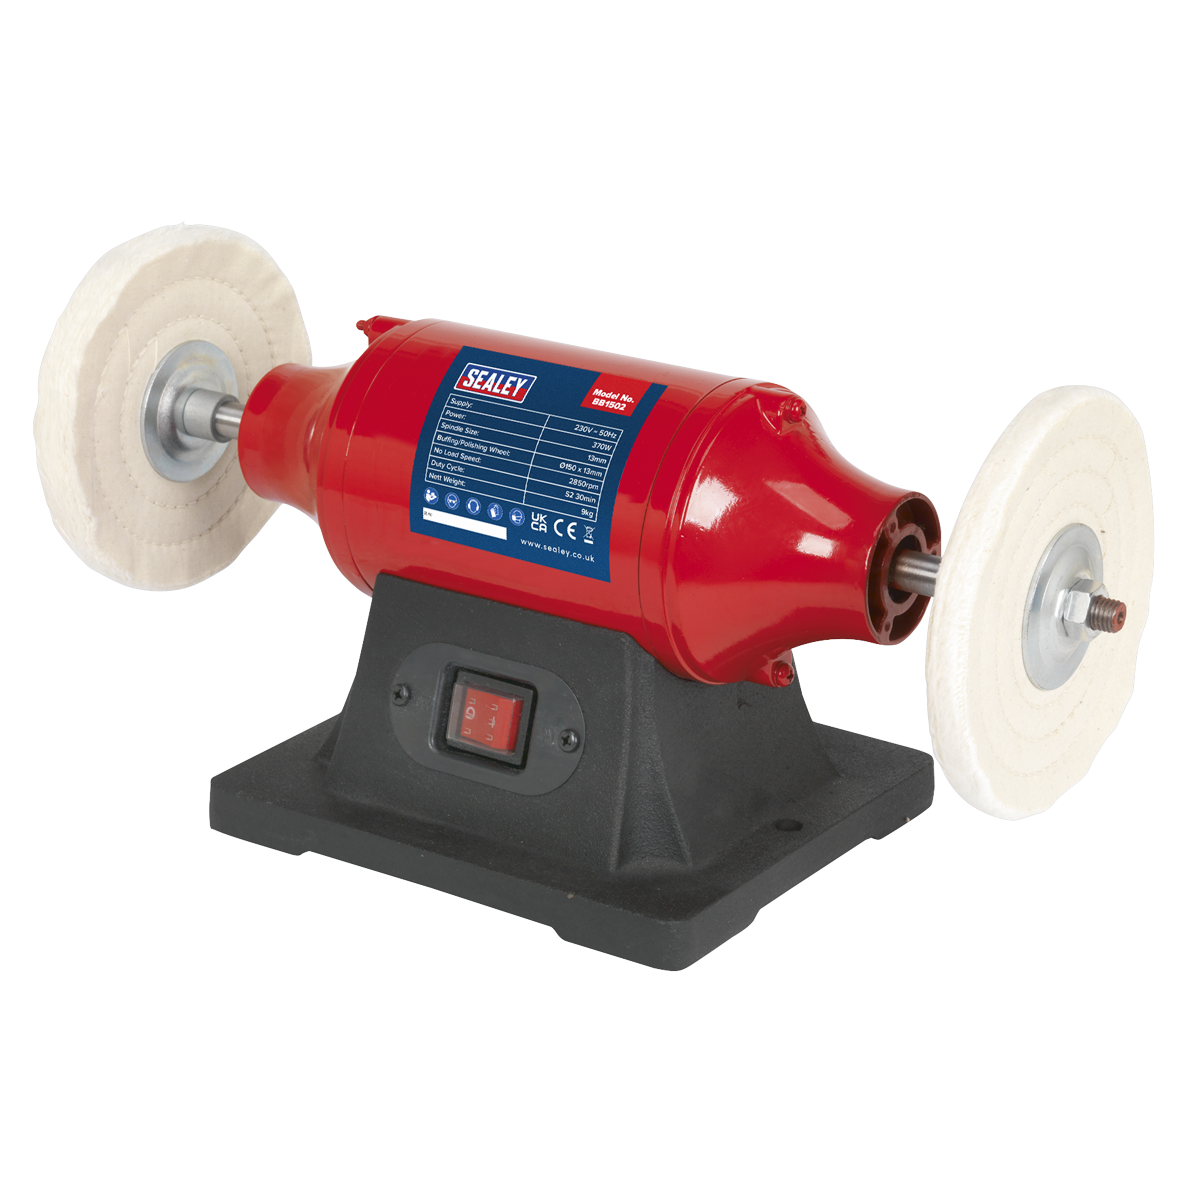 bench grinder with efficient 370W motor provides sufficient power for most tasks.